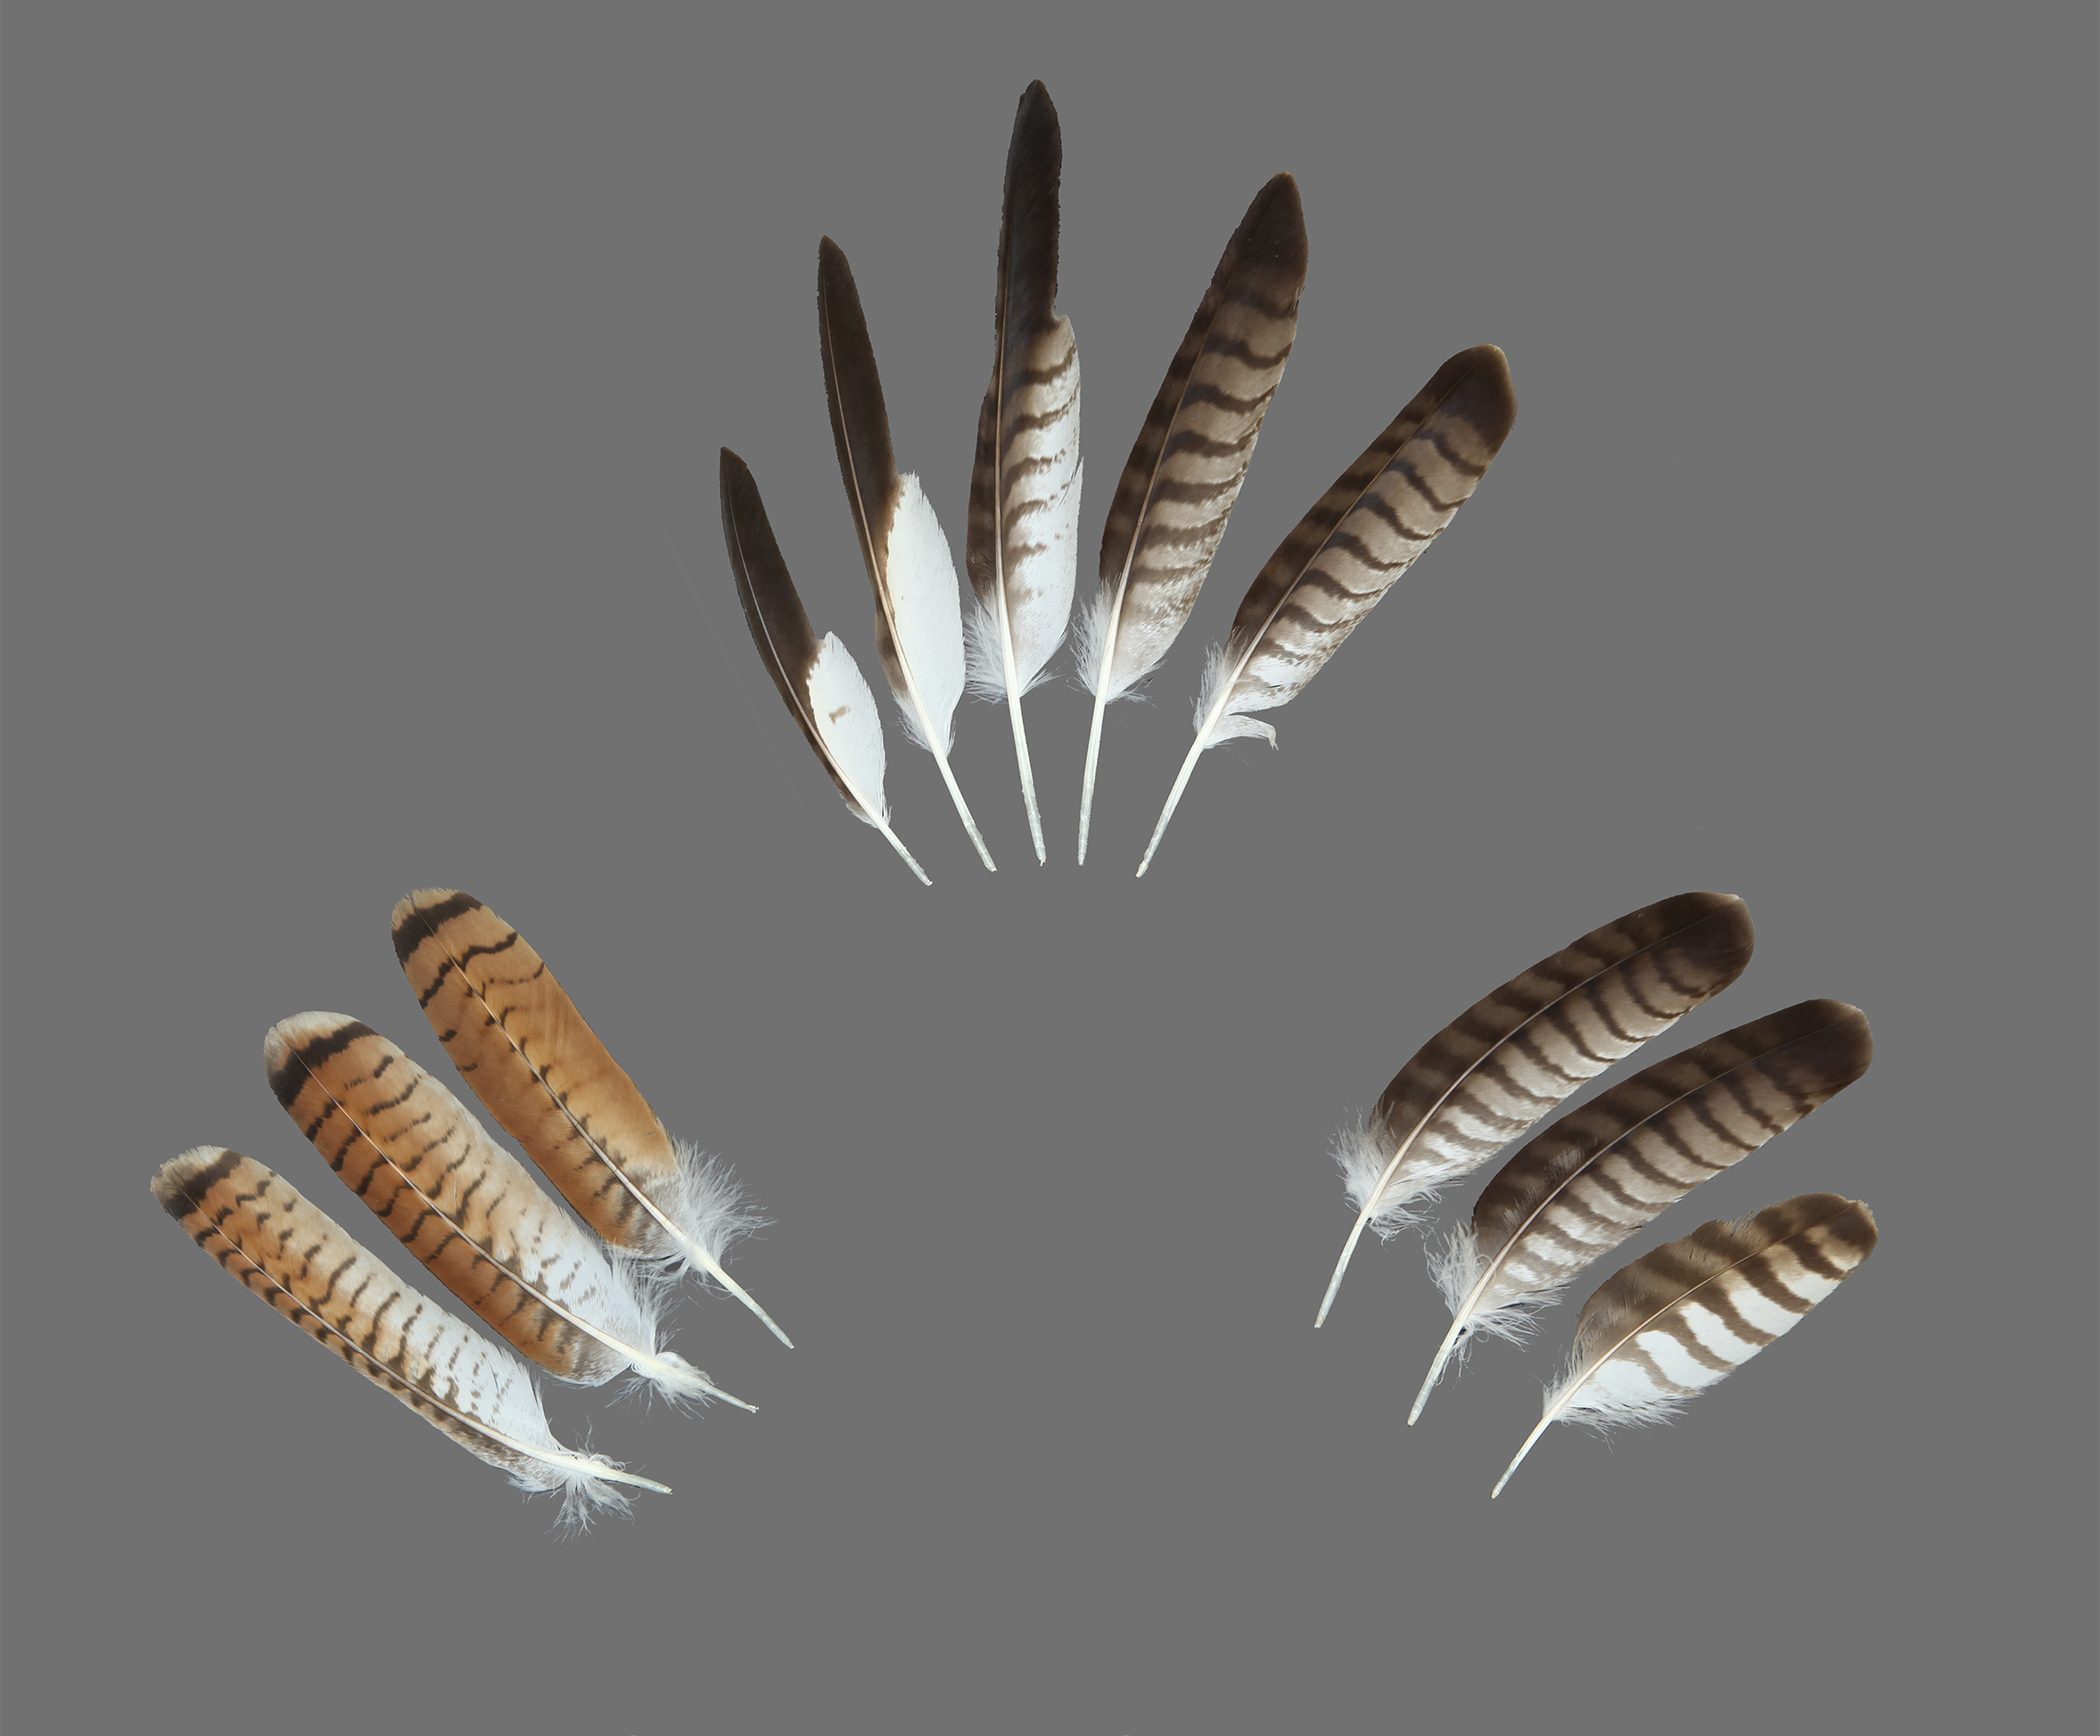 Ask SIB: Can you identify this feather? – SIB